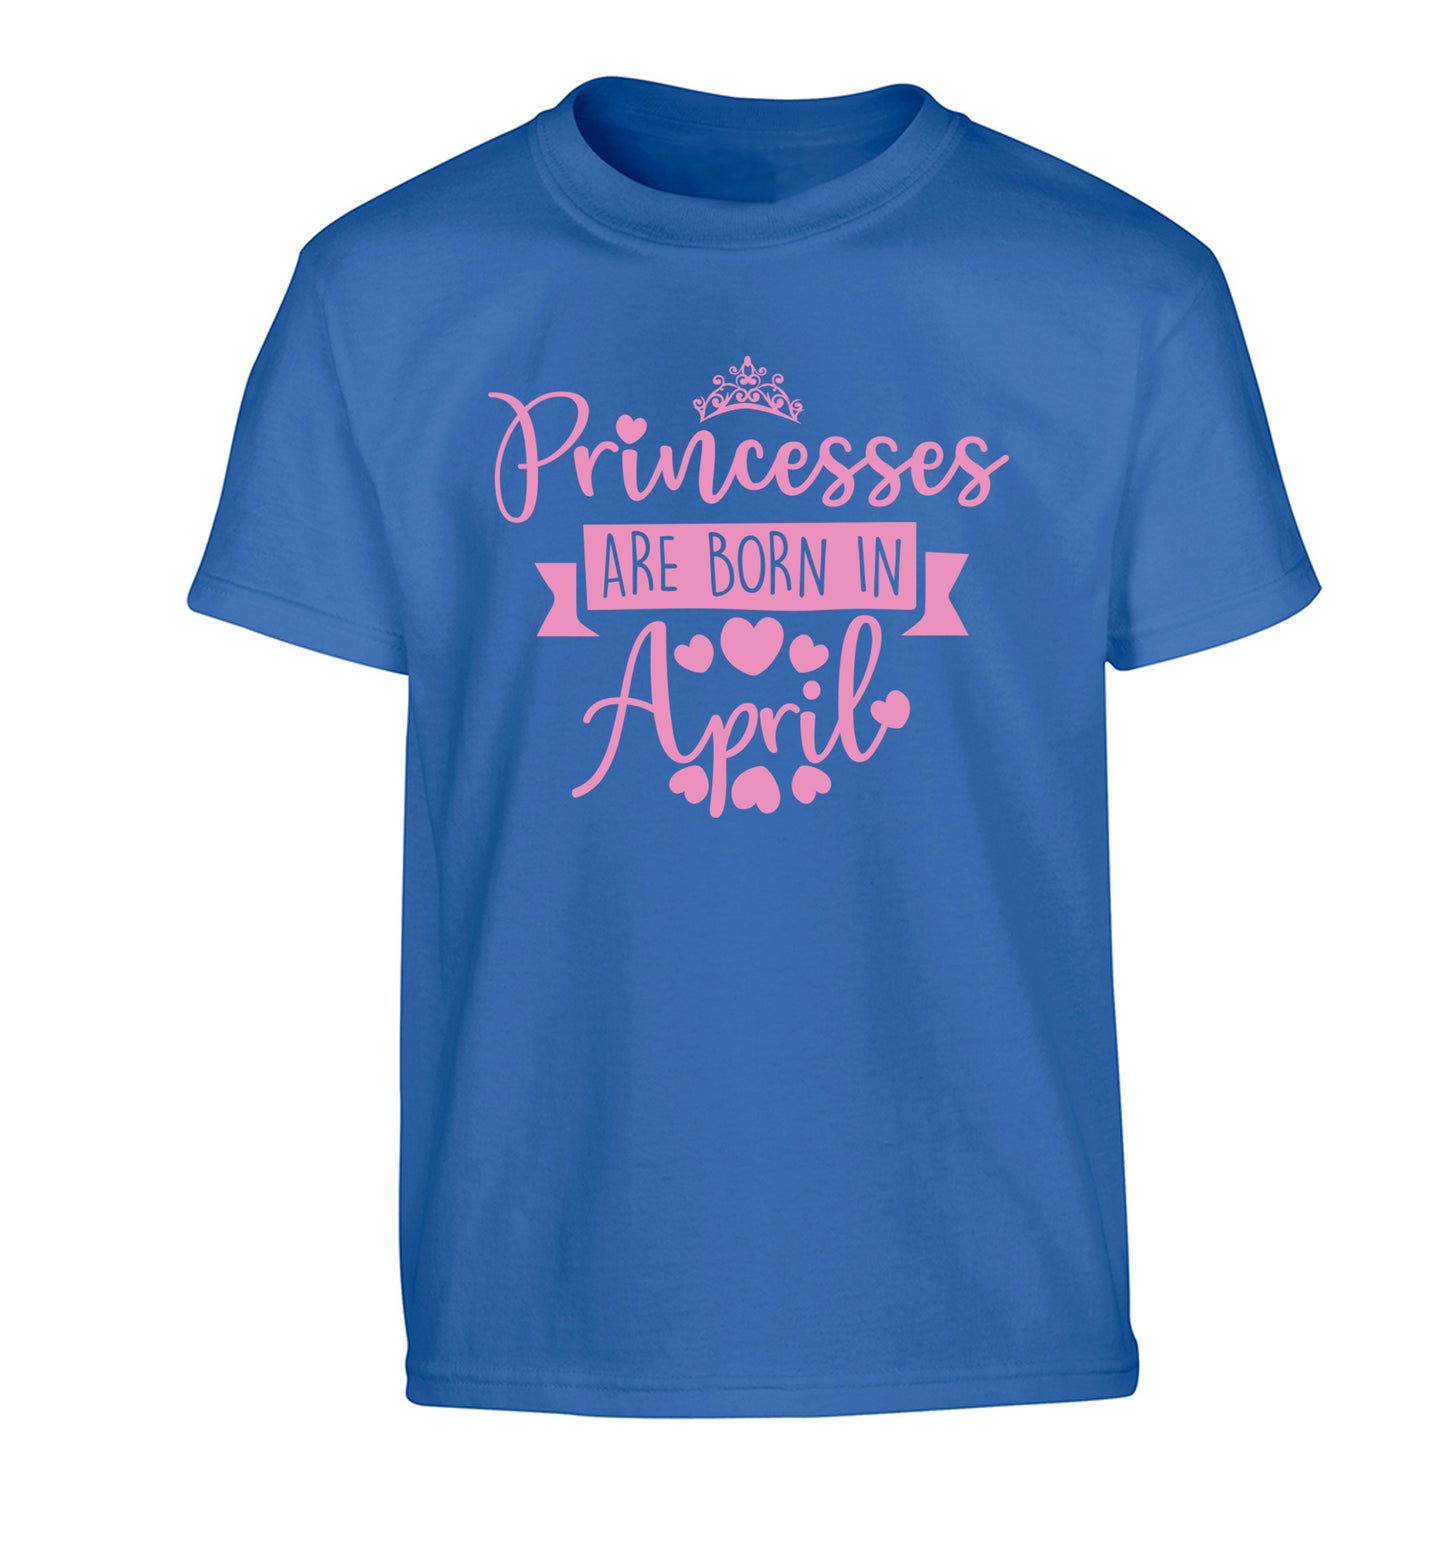 Princesses are born in April Children's blue Tshirt 12-13 Years